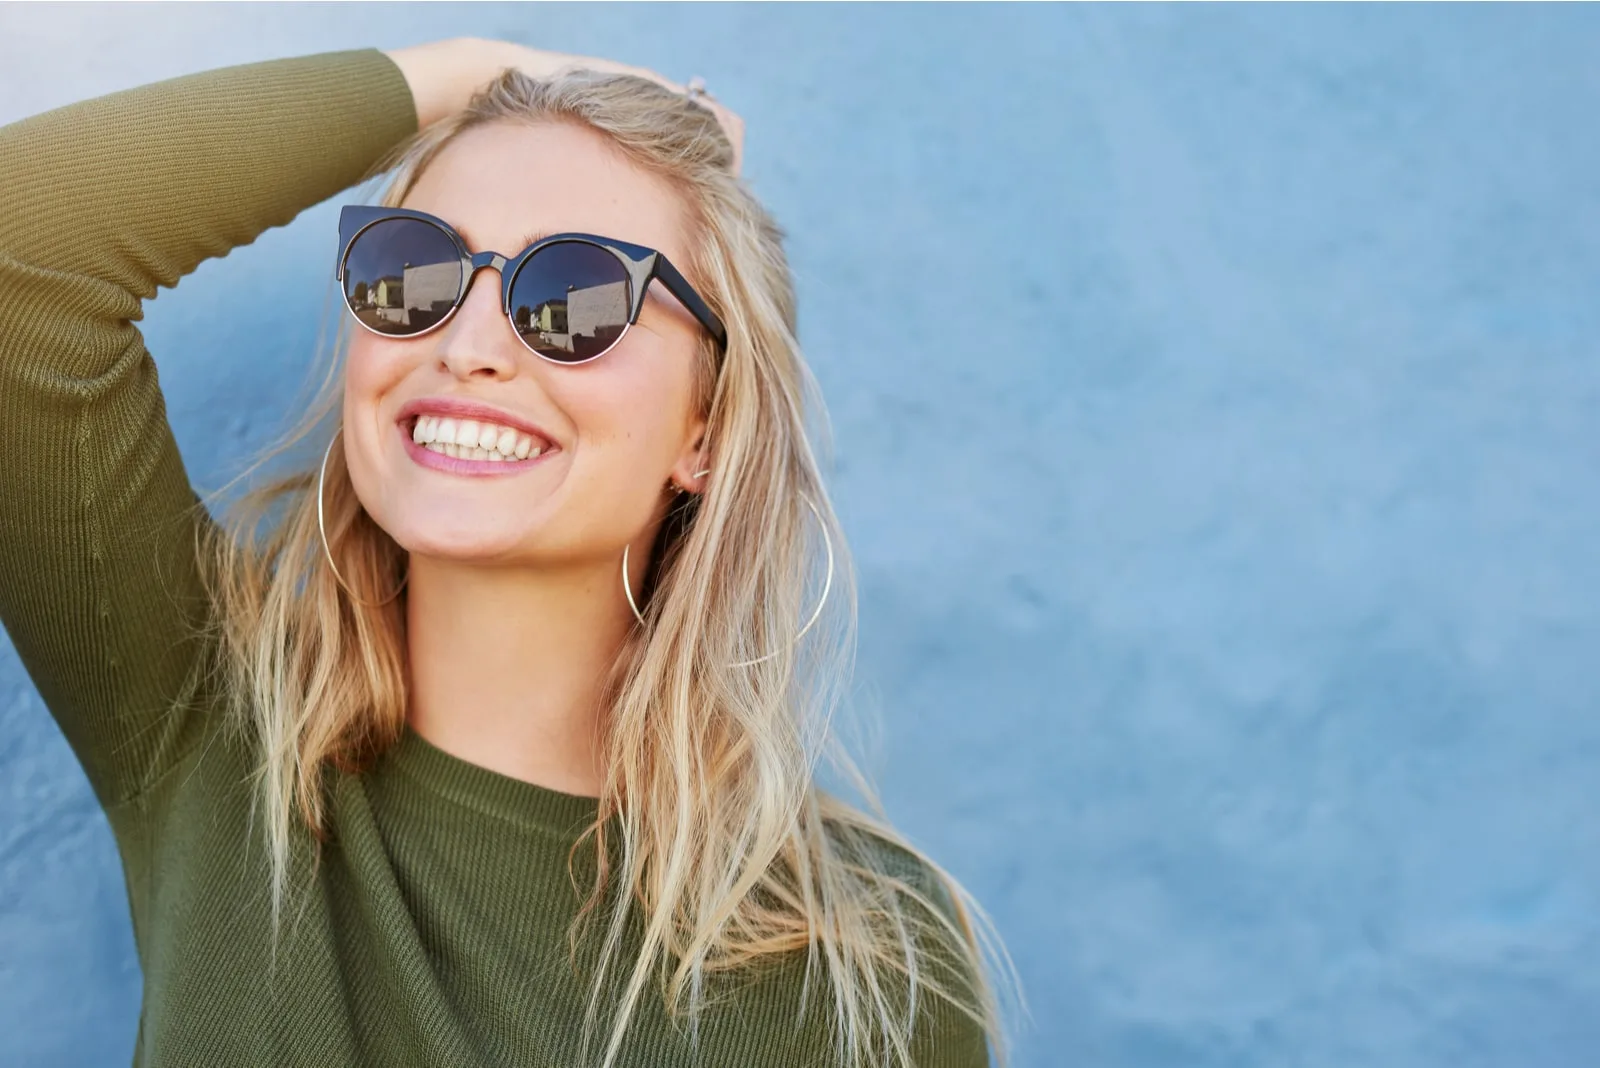 young woman in sunglasses smiling